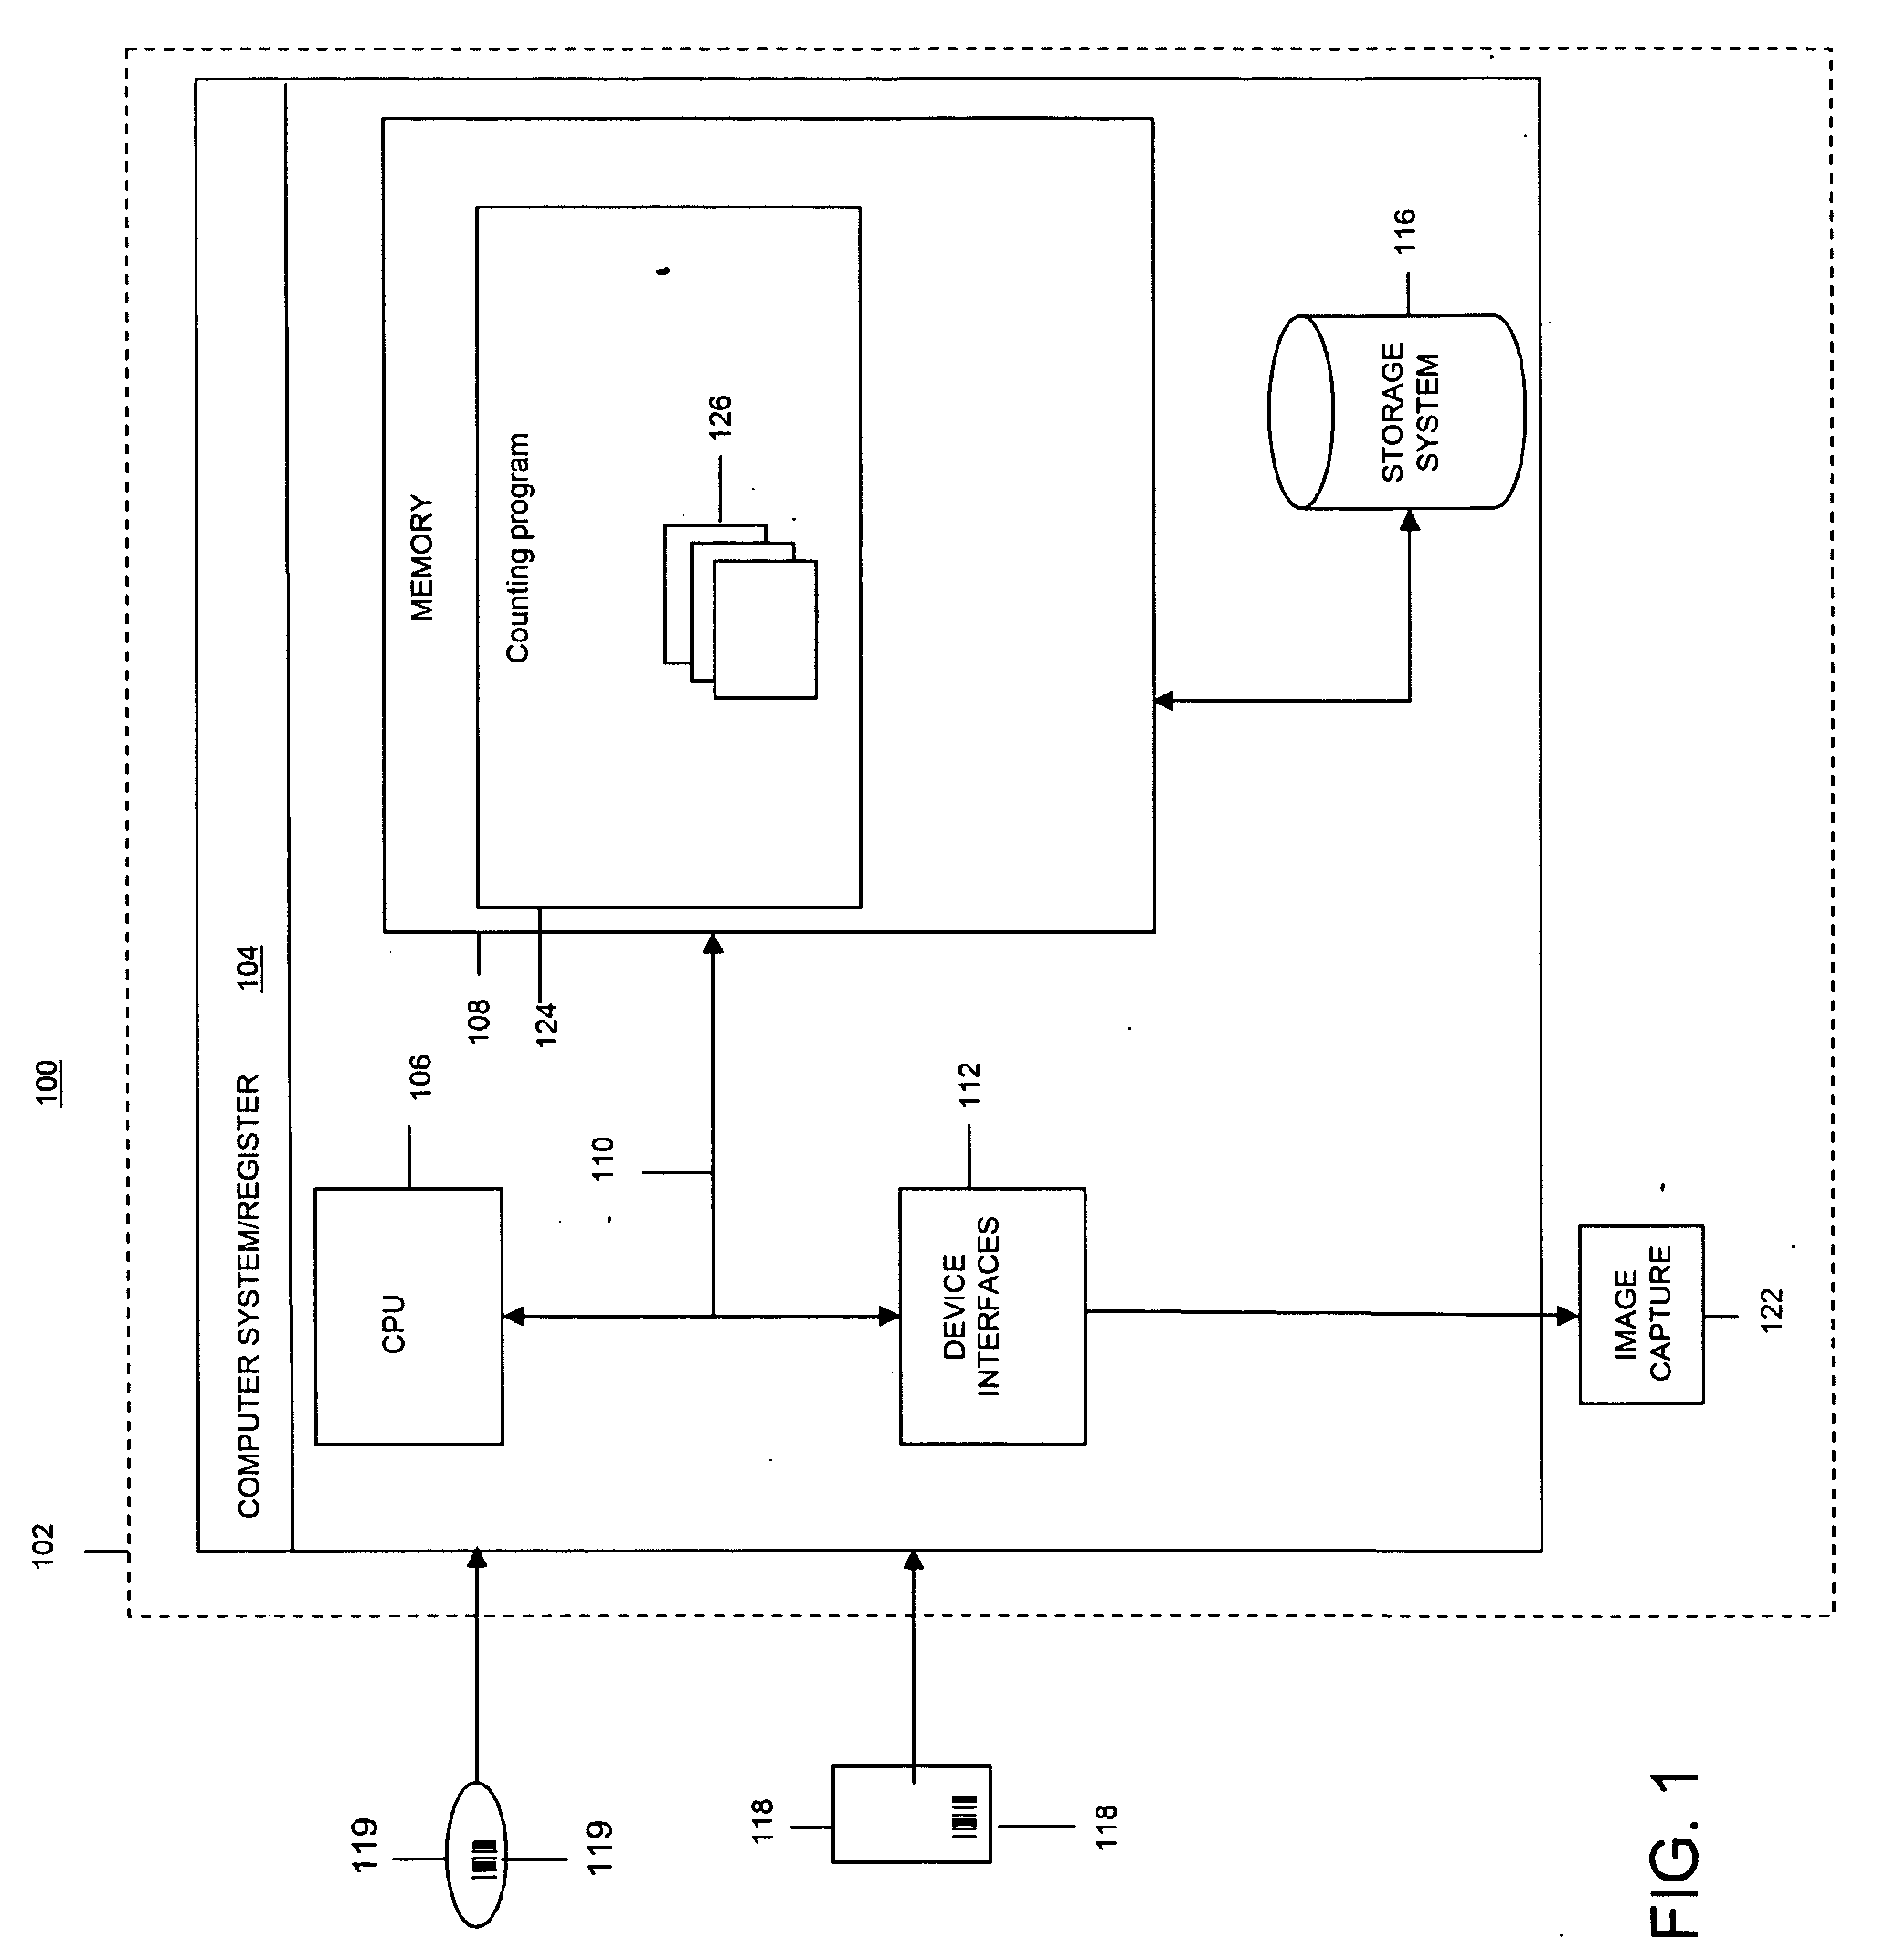 System and method for model based people counting